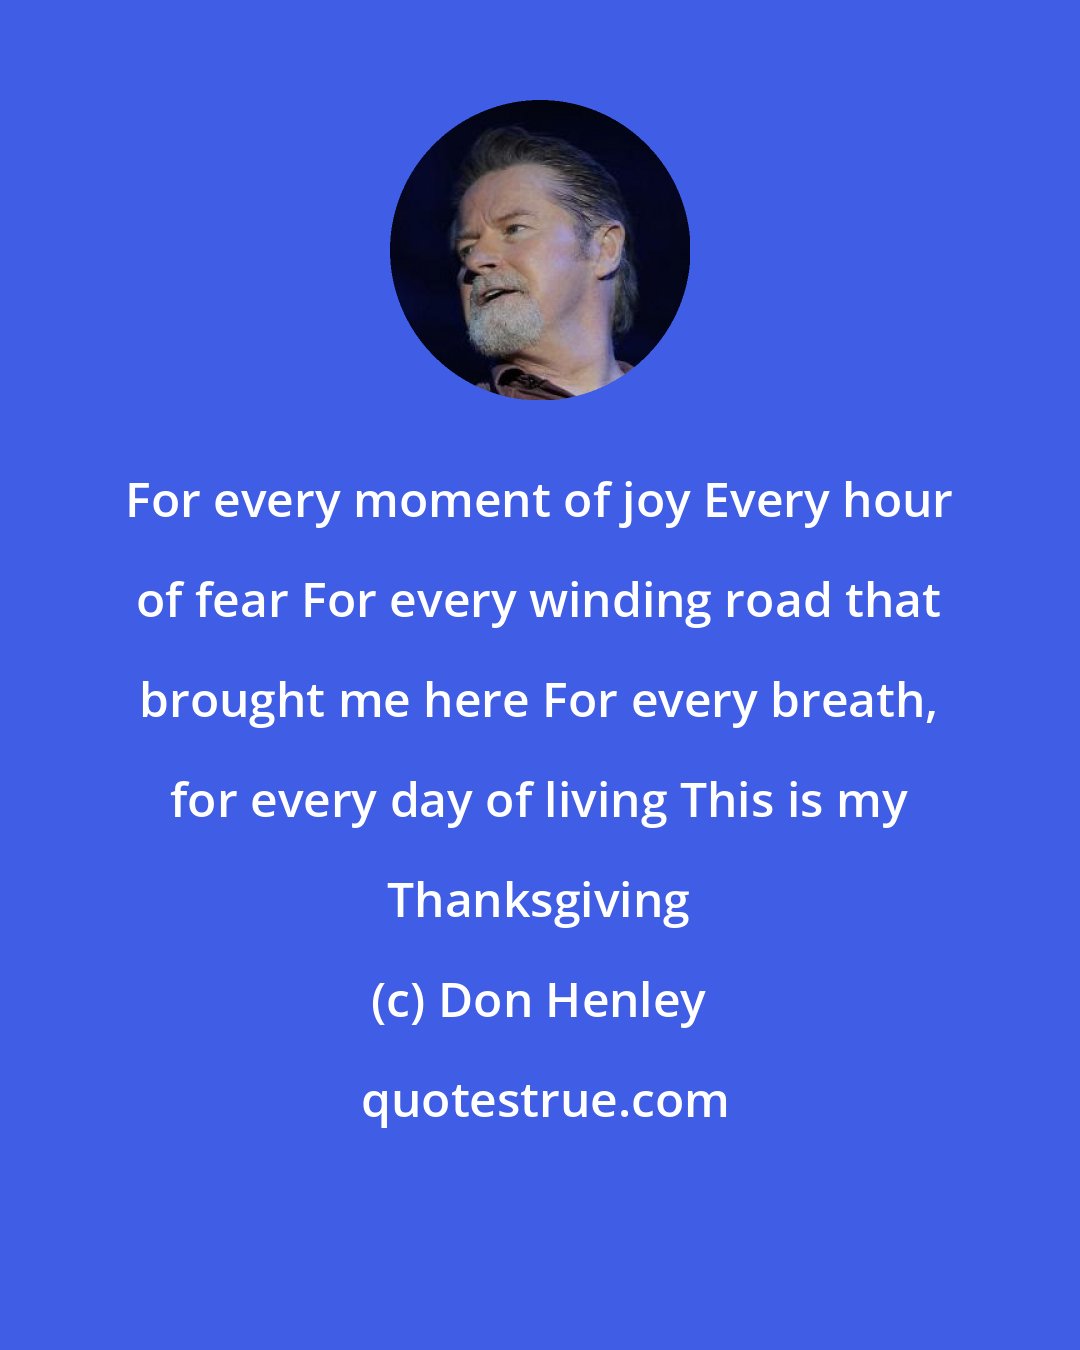 Don Henley: For every moment of joy Every hour of fear For every winding road that brought me here For every breath, for every day of living This is my Thanksgiving